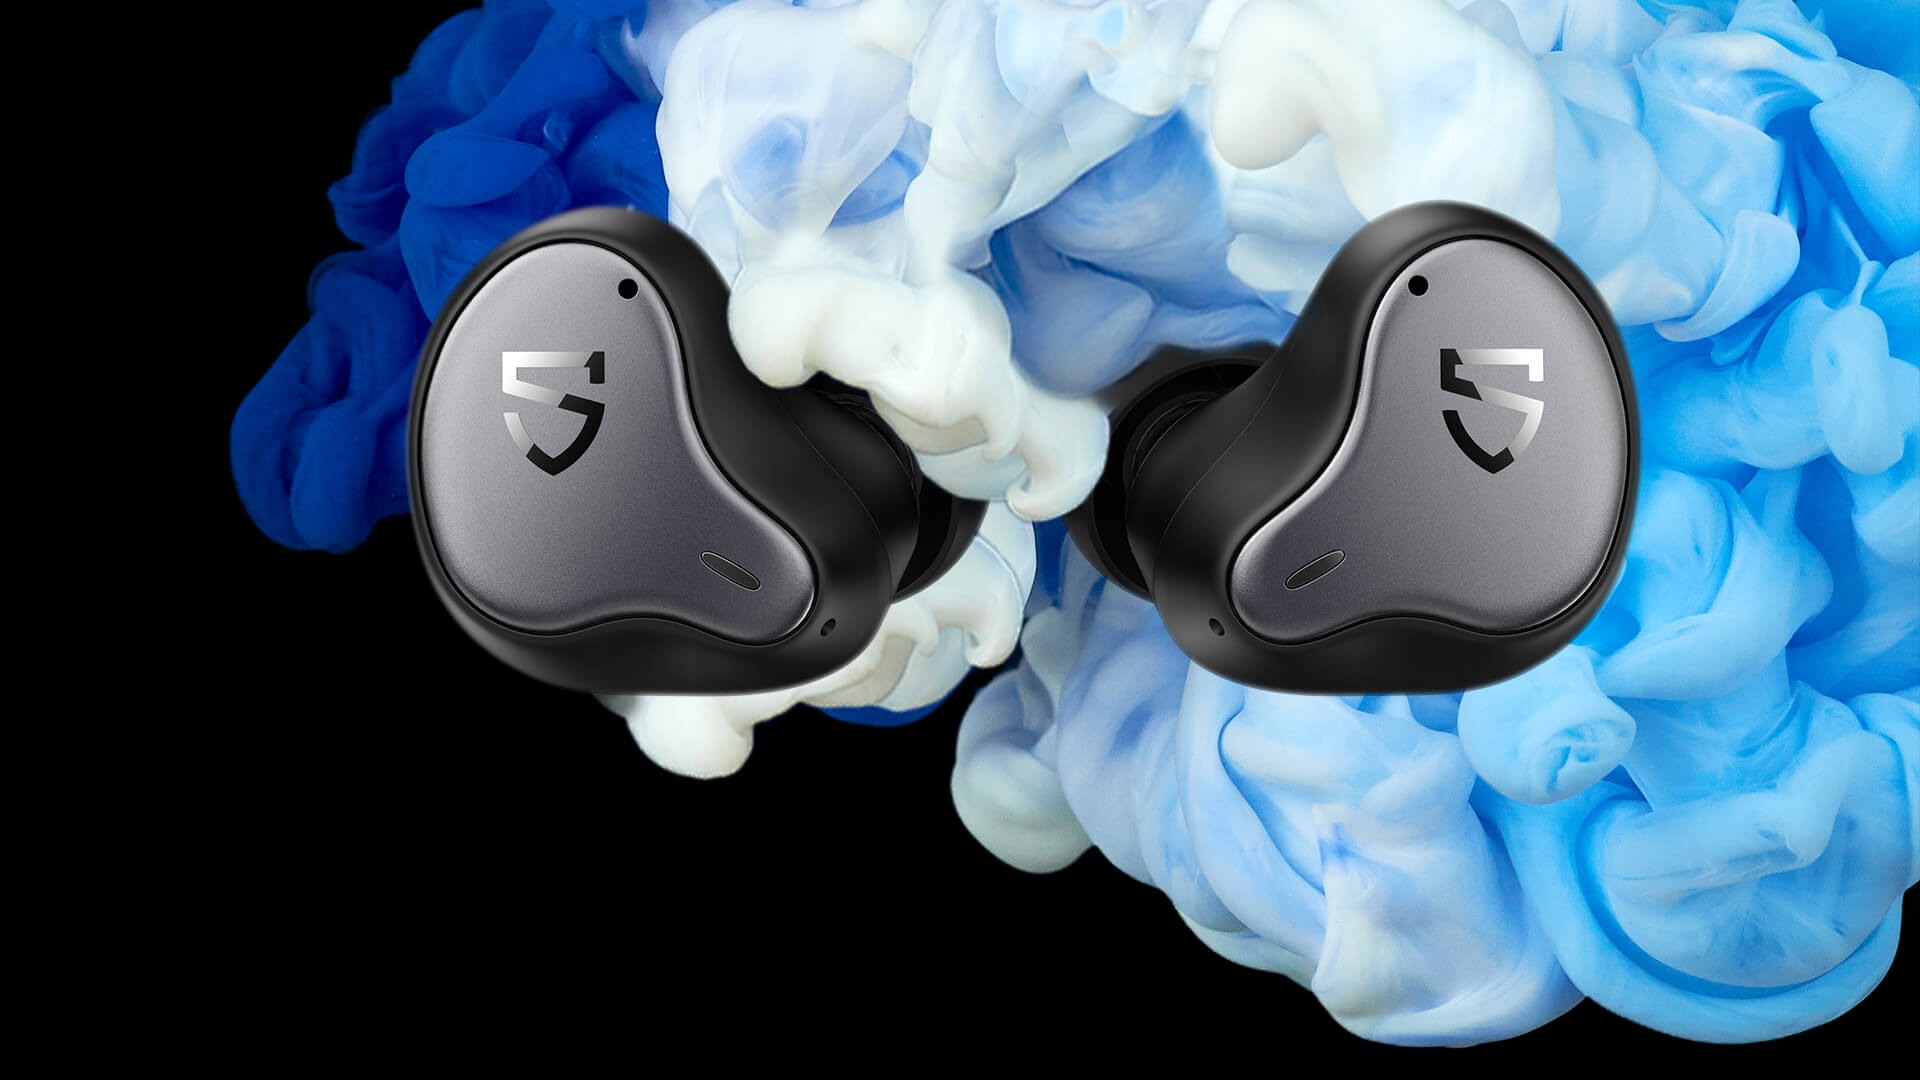 SOUNDPEATS H1 earbuds review